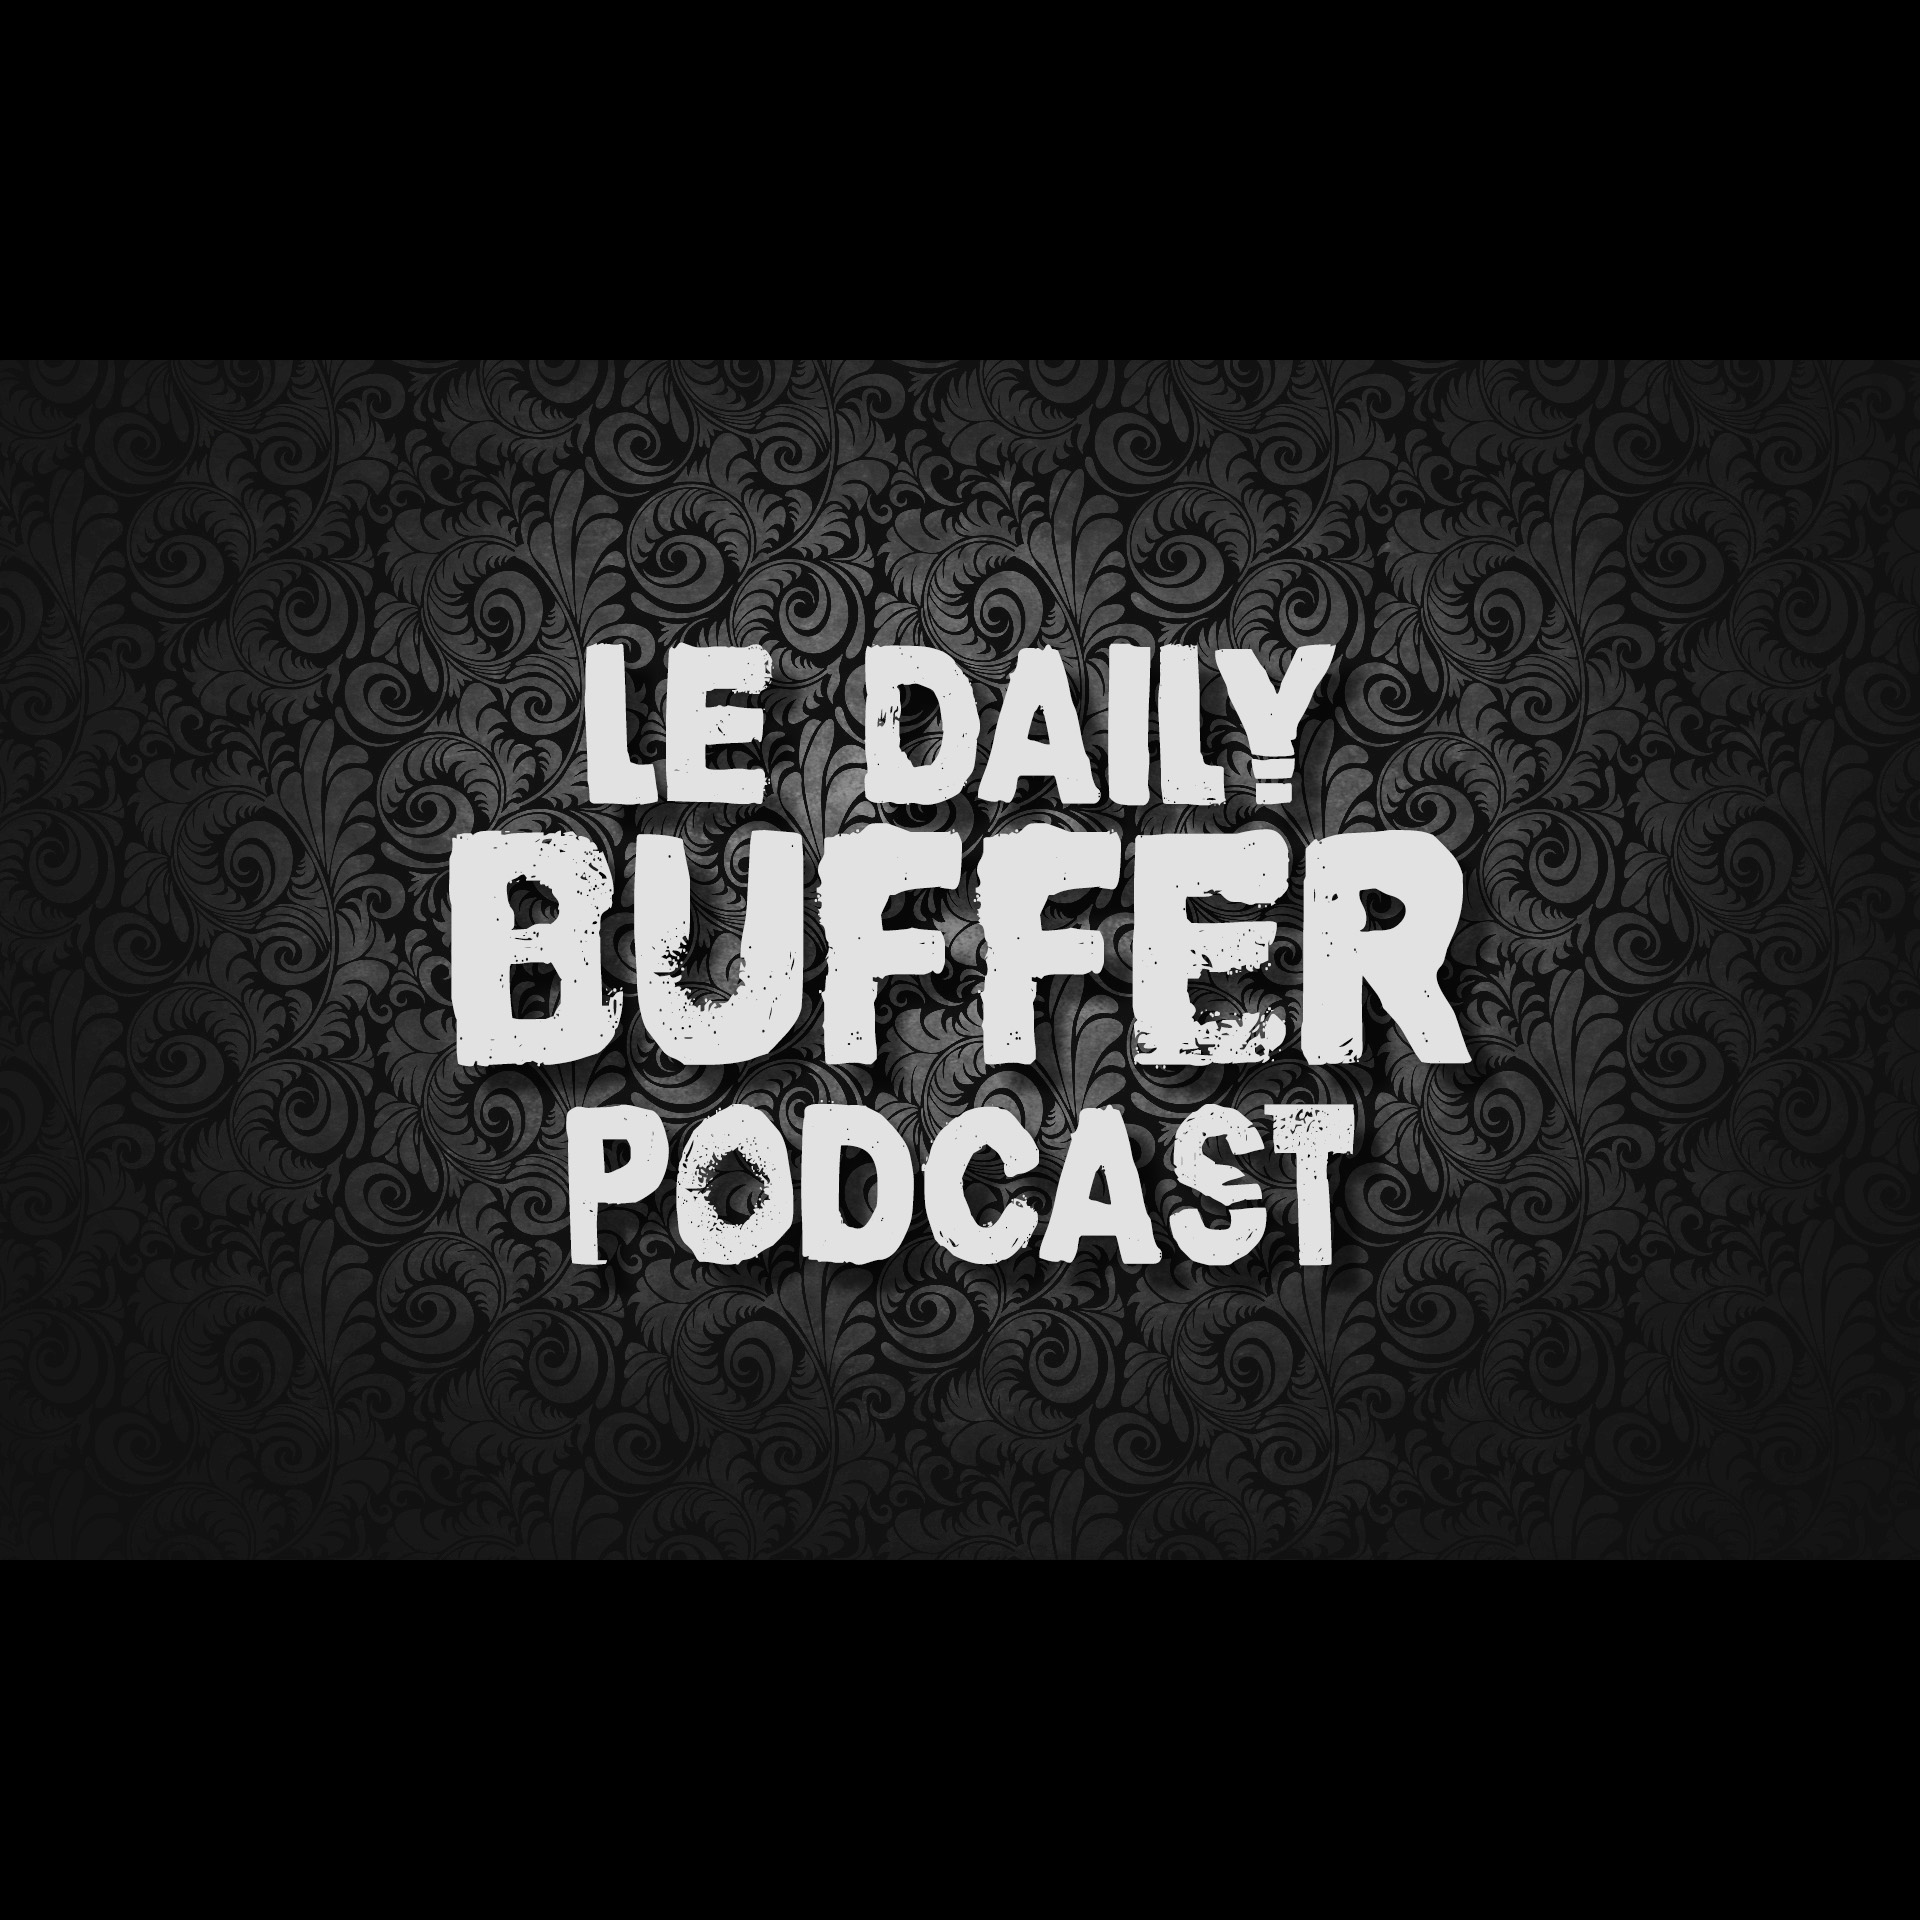 Le Daily Buffer Podcast - 2019 02 26 - Les Pedophiles Vont Tuer Youtube